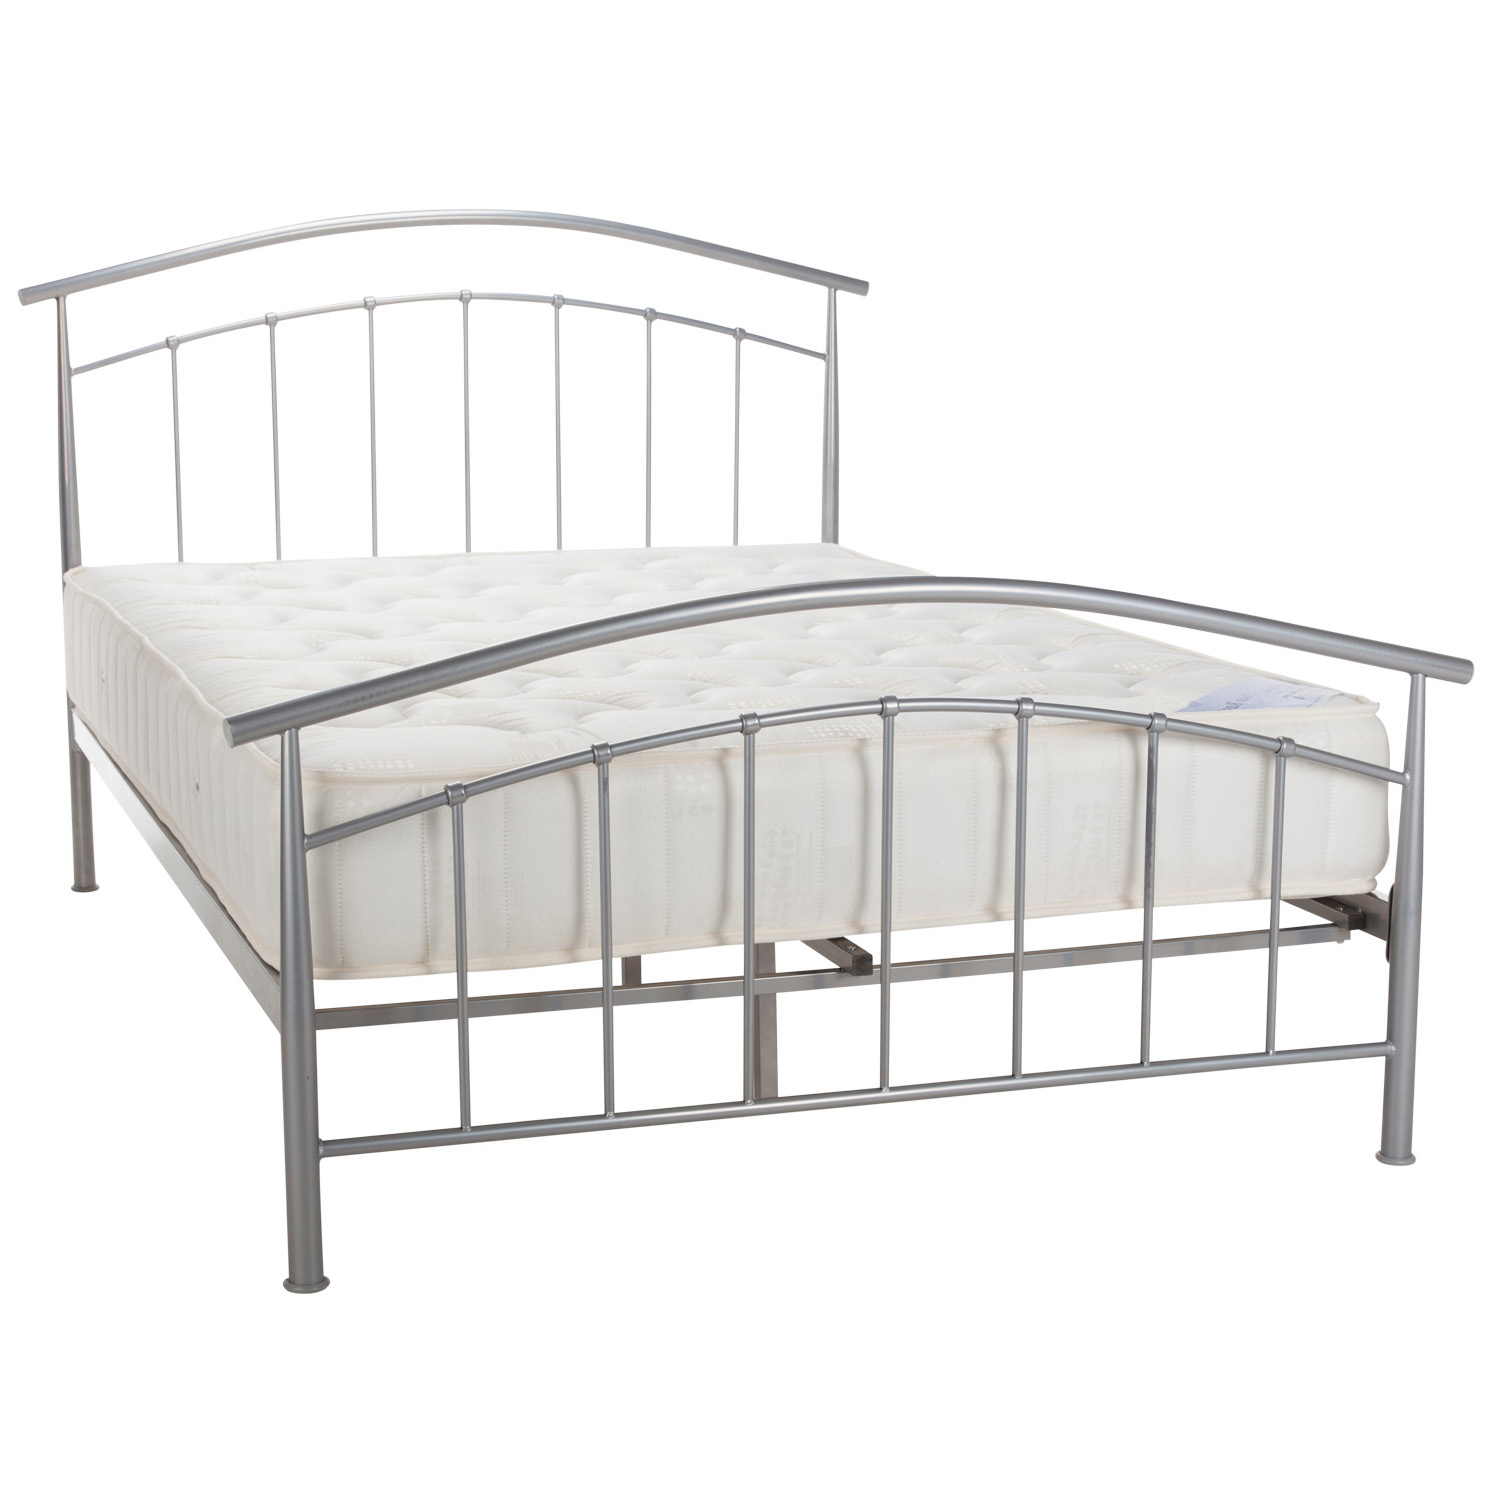 Mercury pearl silver bed frame by Serene.